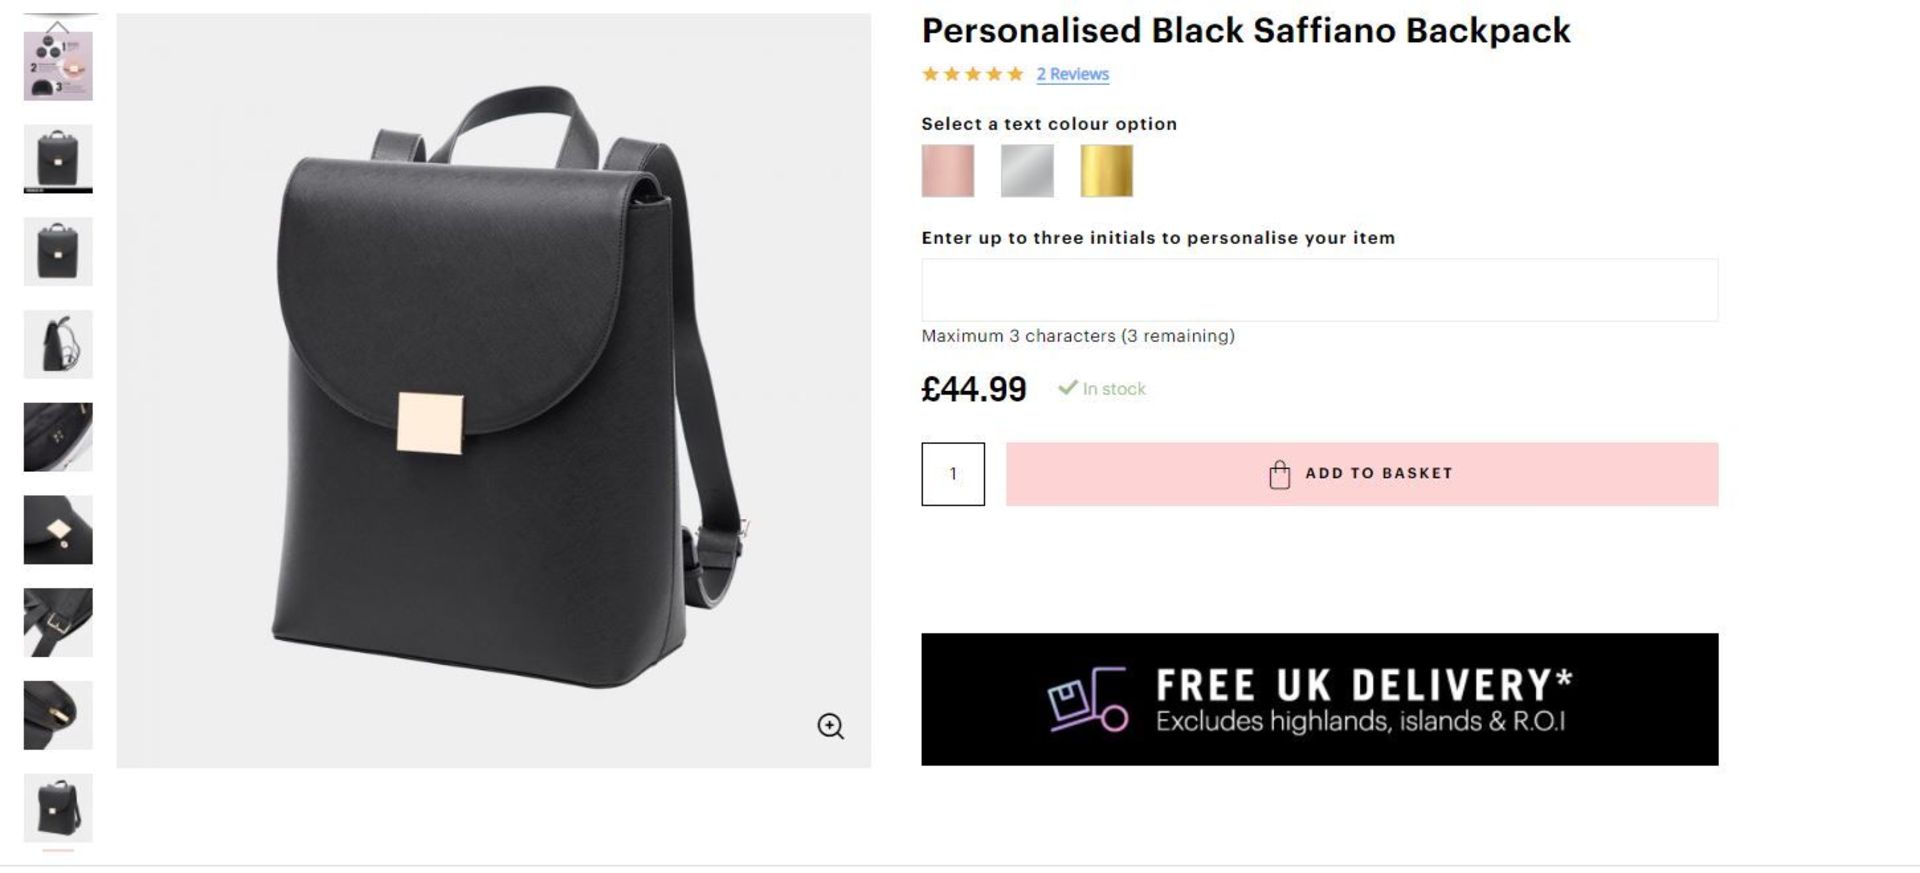 2 x NEW PACKAGED Beauti Saffiano Backpack - Blush. RRP £49.99 each. Note: Item is not personalised.